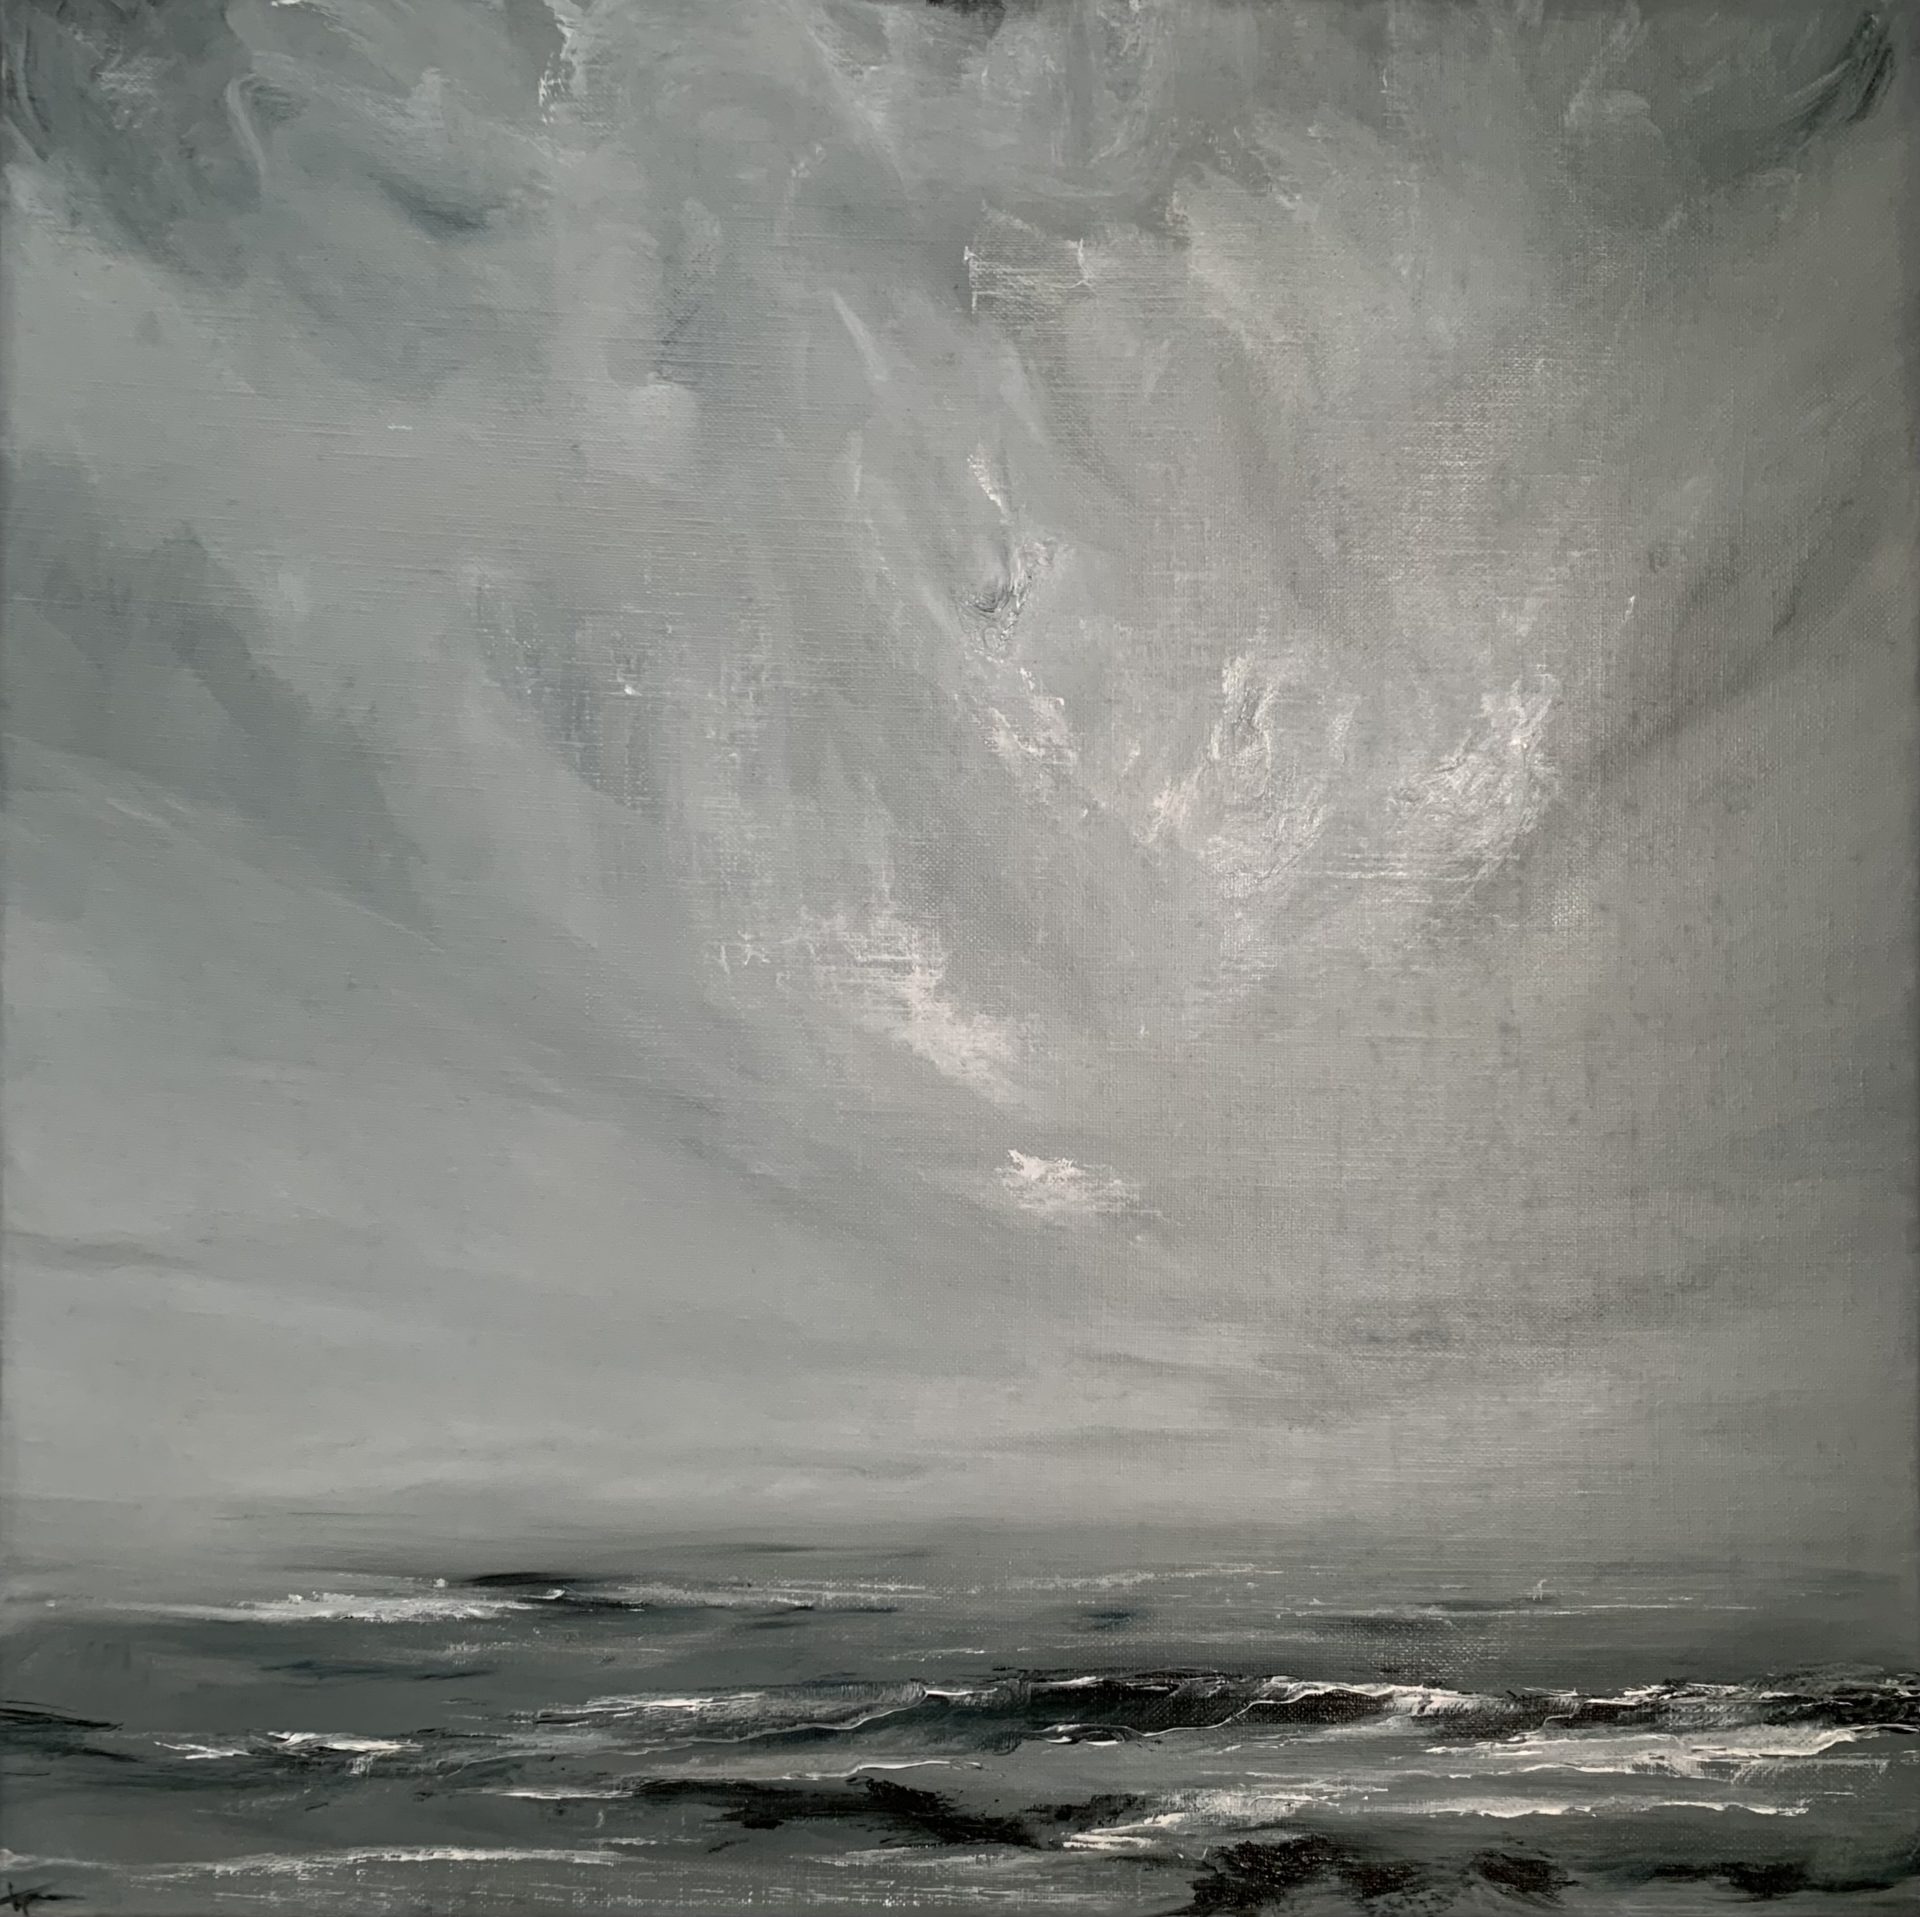 Original seascape oil painting by Tisha Mark, "Wintry Seas No. 1" 20"x20" oil on linen (2024). Wintertime sea and sky, painted in a limited palette of grays, blue, browns, black, and white.